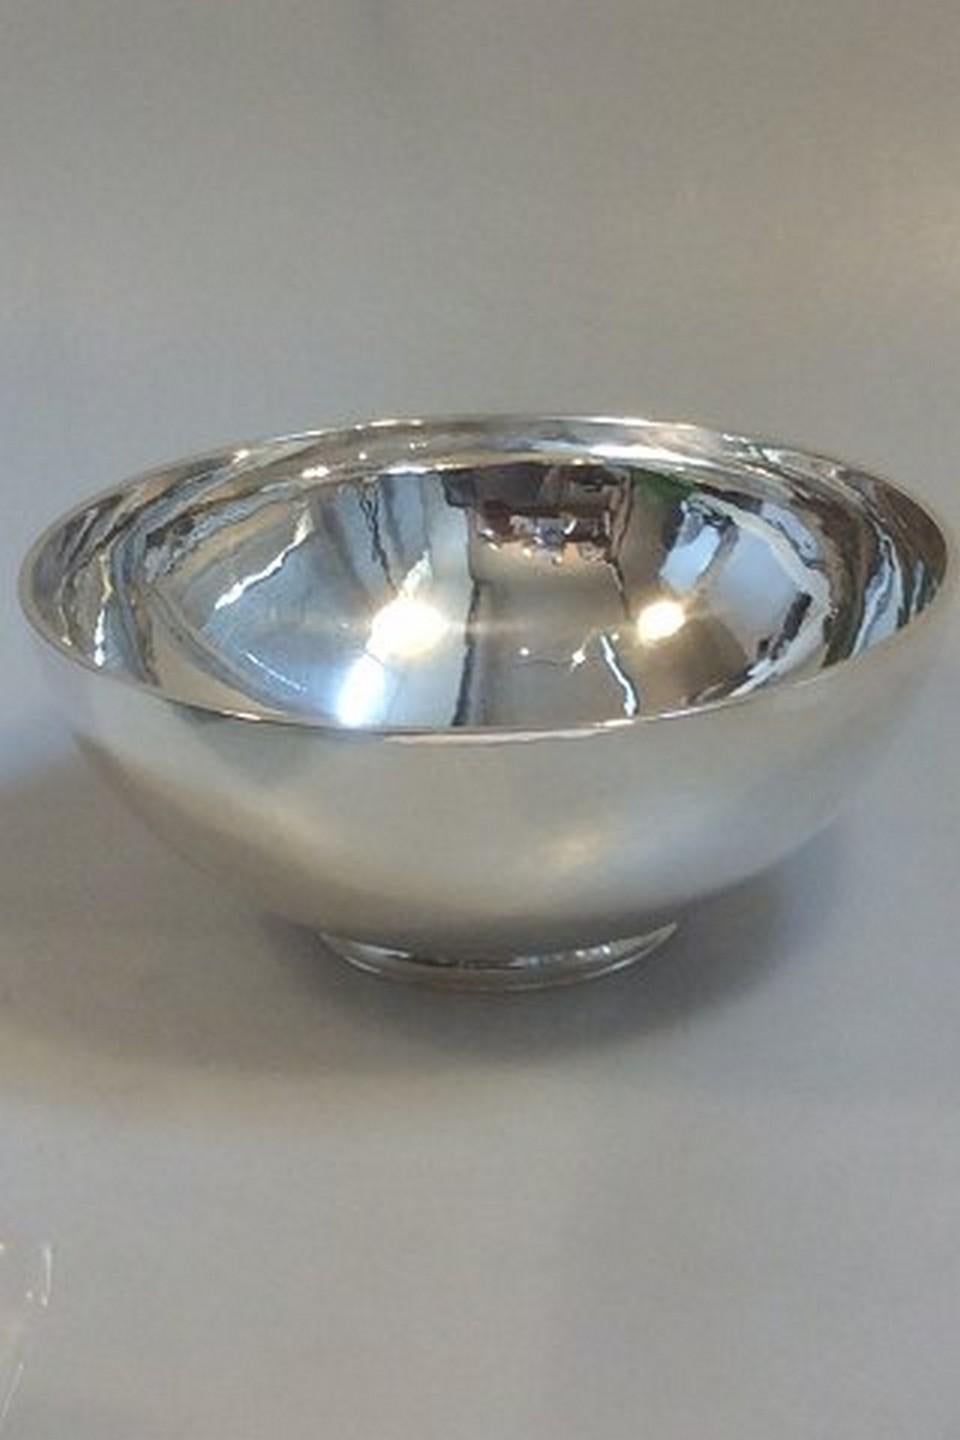 Georg Jensen sterling silver bowl by Harald Nielsen no 547 B

Measures 18.3cm diameter and 8cm high ( 7.2